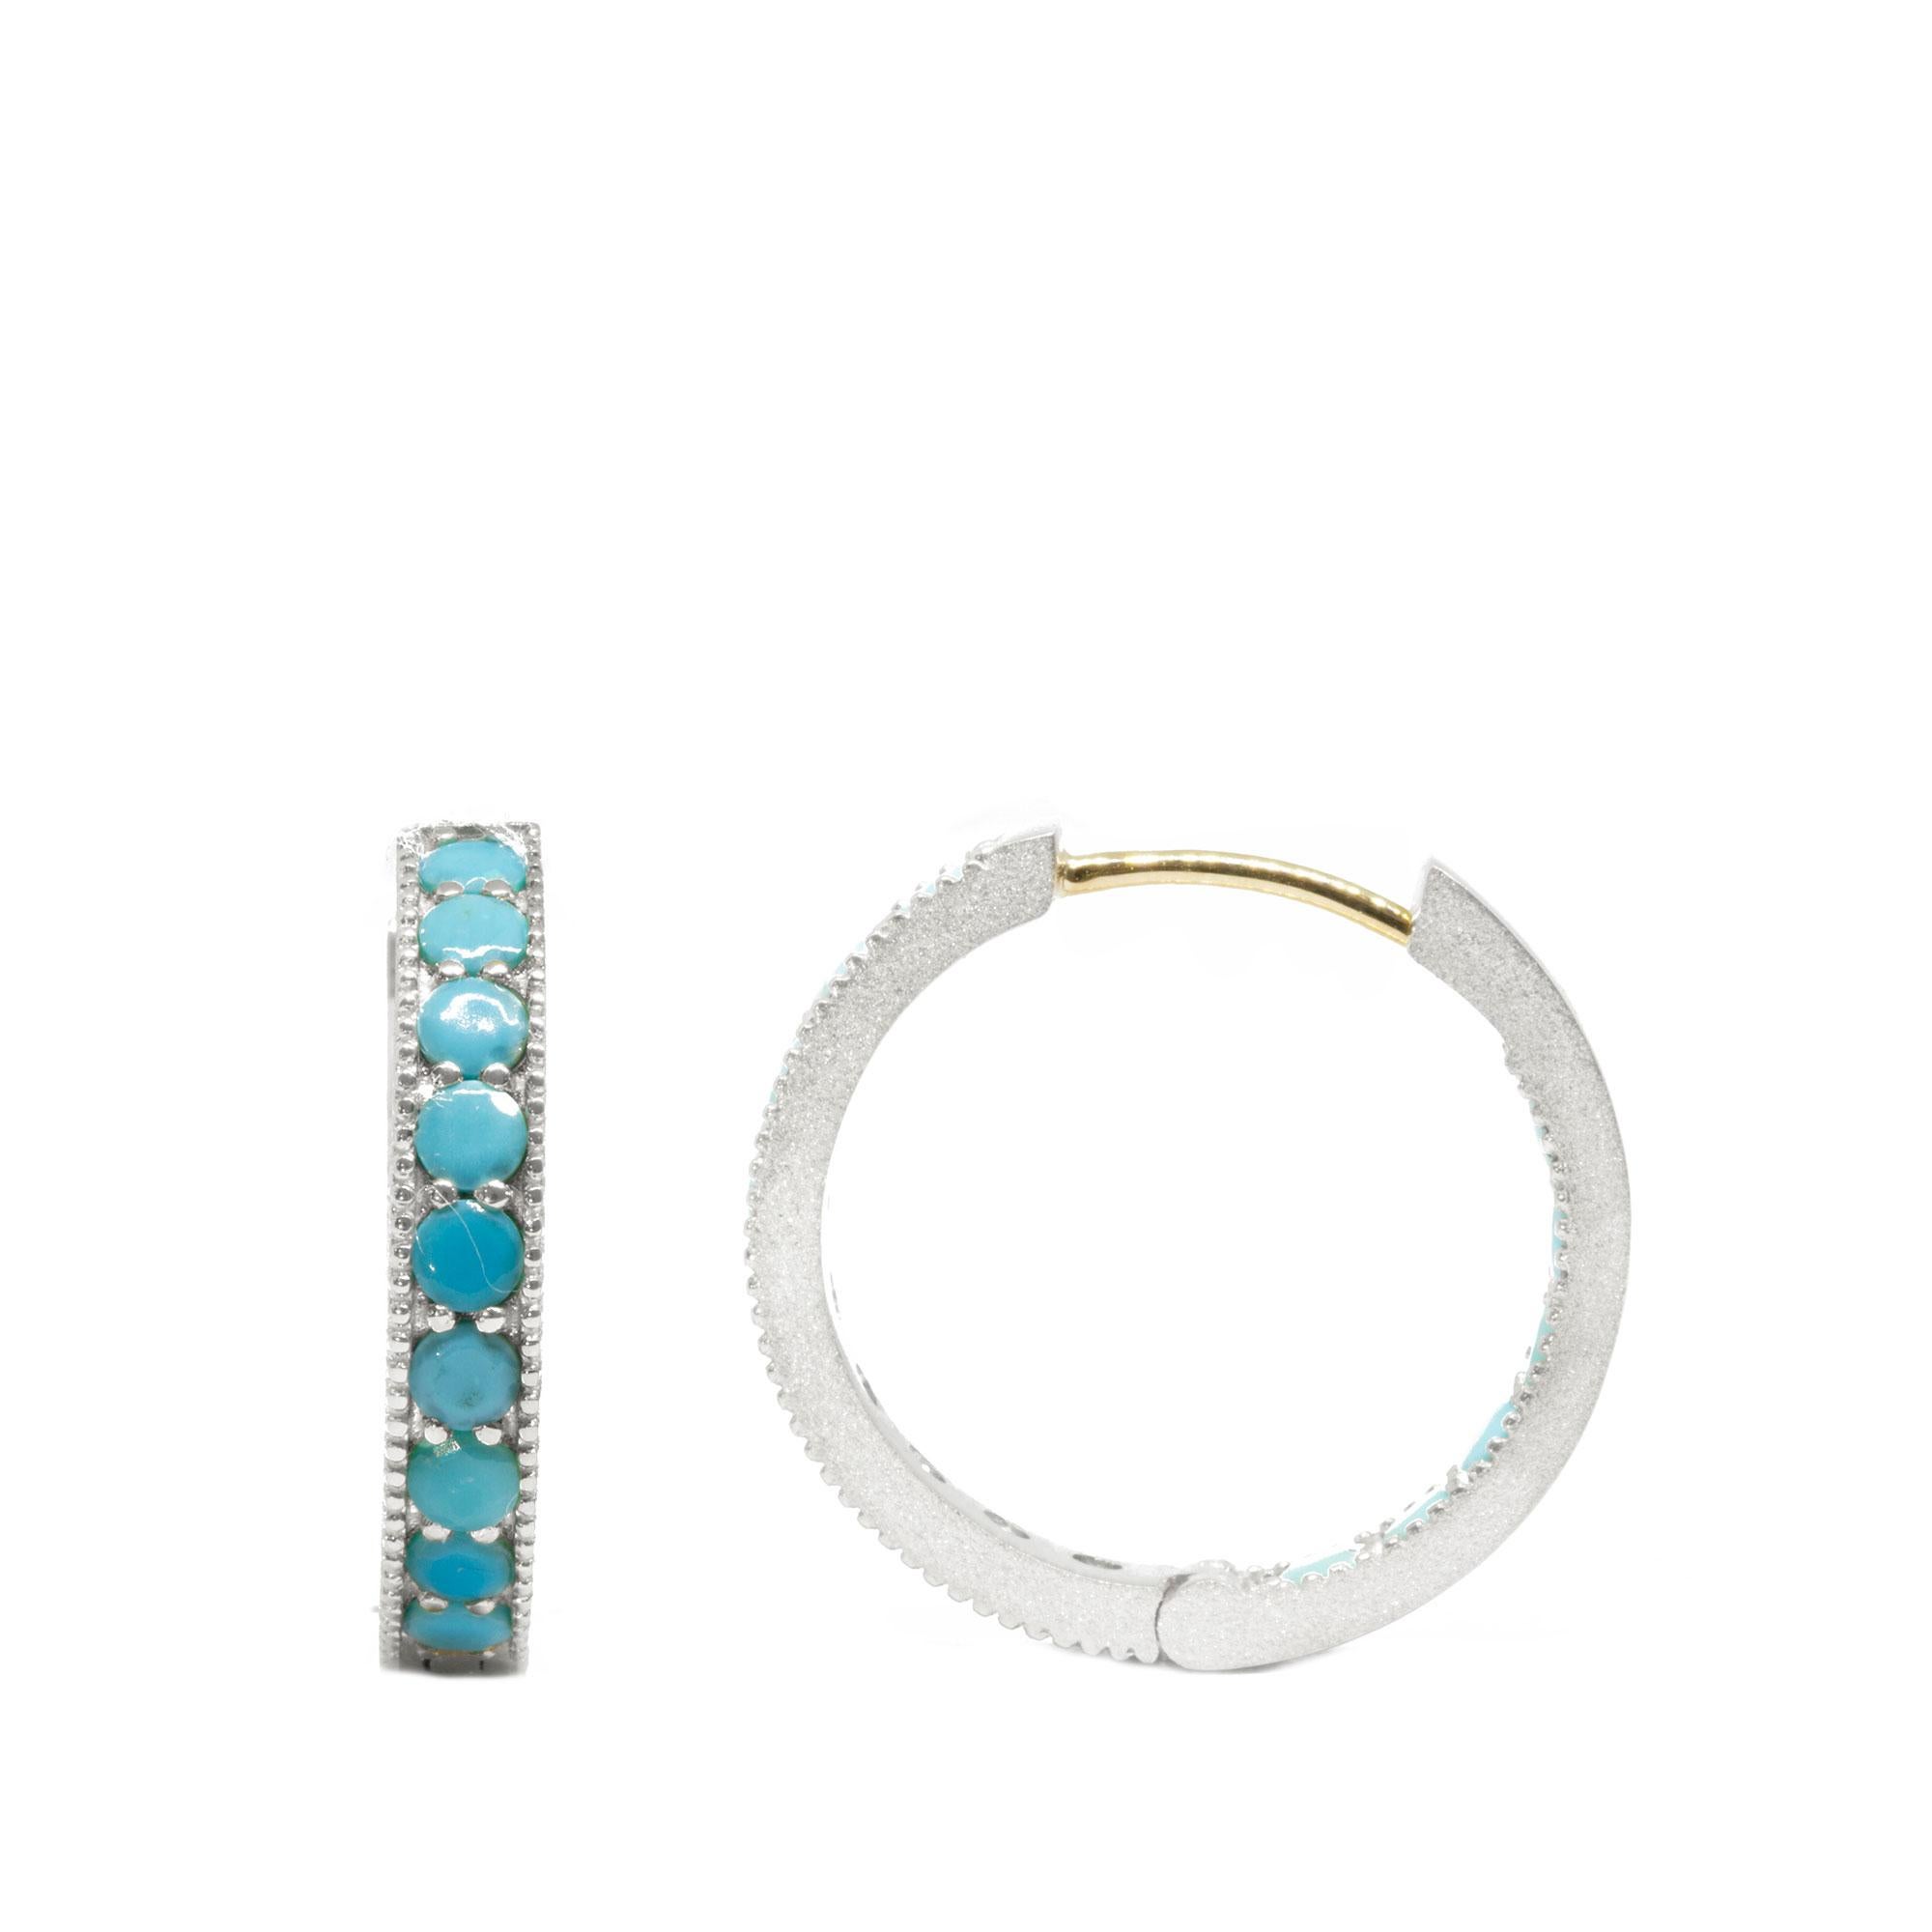 The Gemma re-define glamorous and designed to stand out, but they’re not going to bump into your face! Our collectors really love these silver hoop earrings because they’re richly detailed with intricate milgrain edges, and nice and thick for